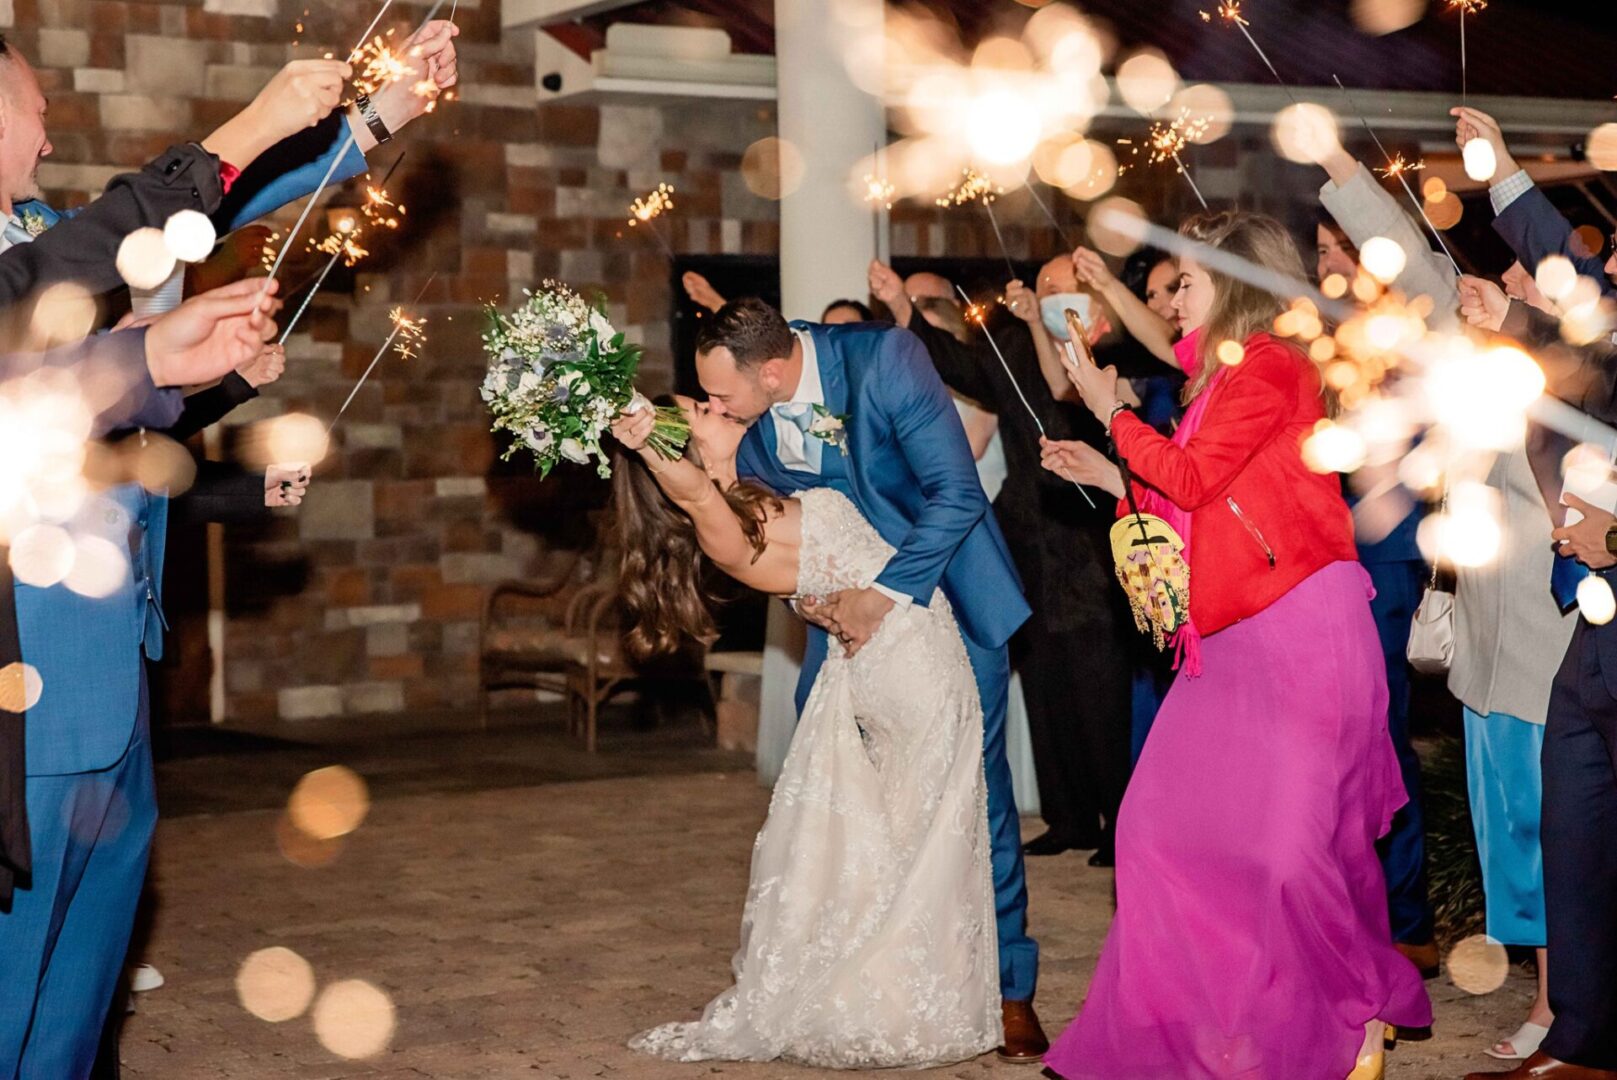 A Bride and Groom Kissing With Guests Holding Crackers